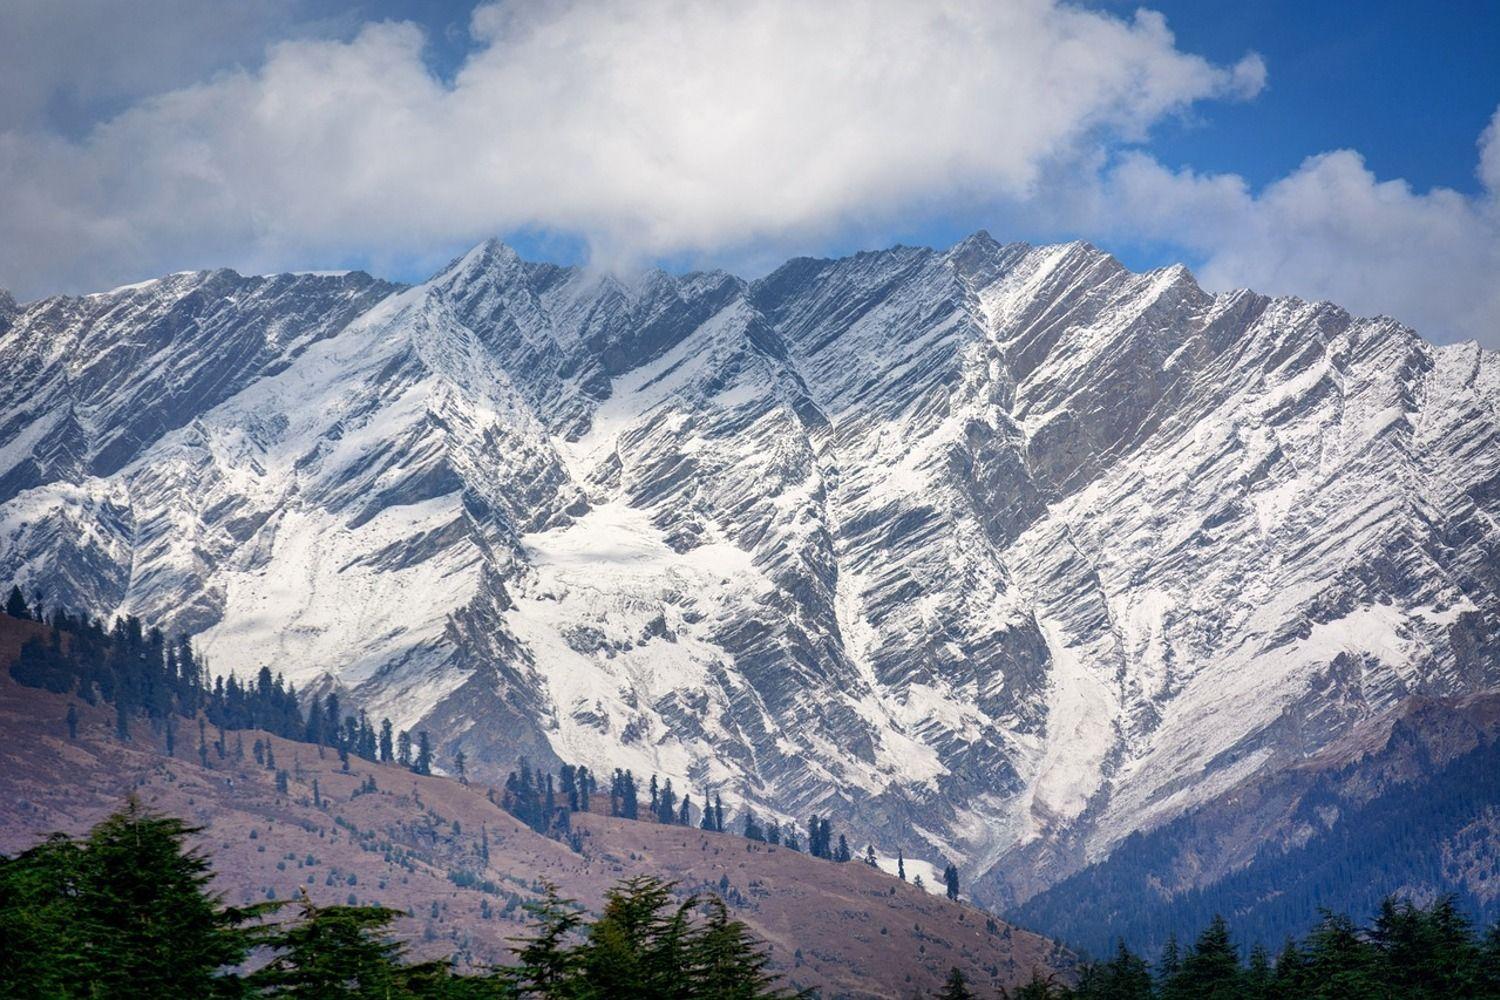 Manali Photos, Images for Manali, Kullu Pictures hd, Manali Winter Pics  Latest